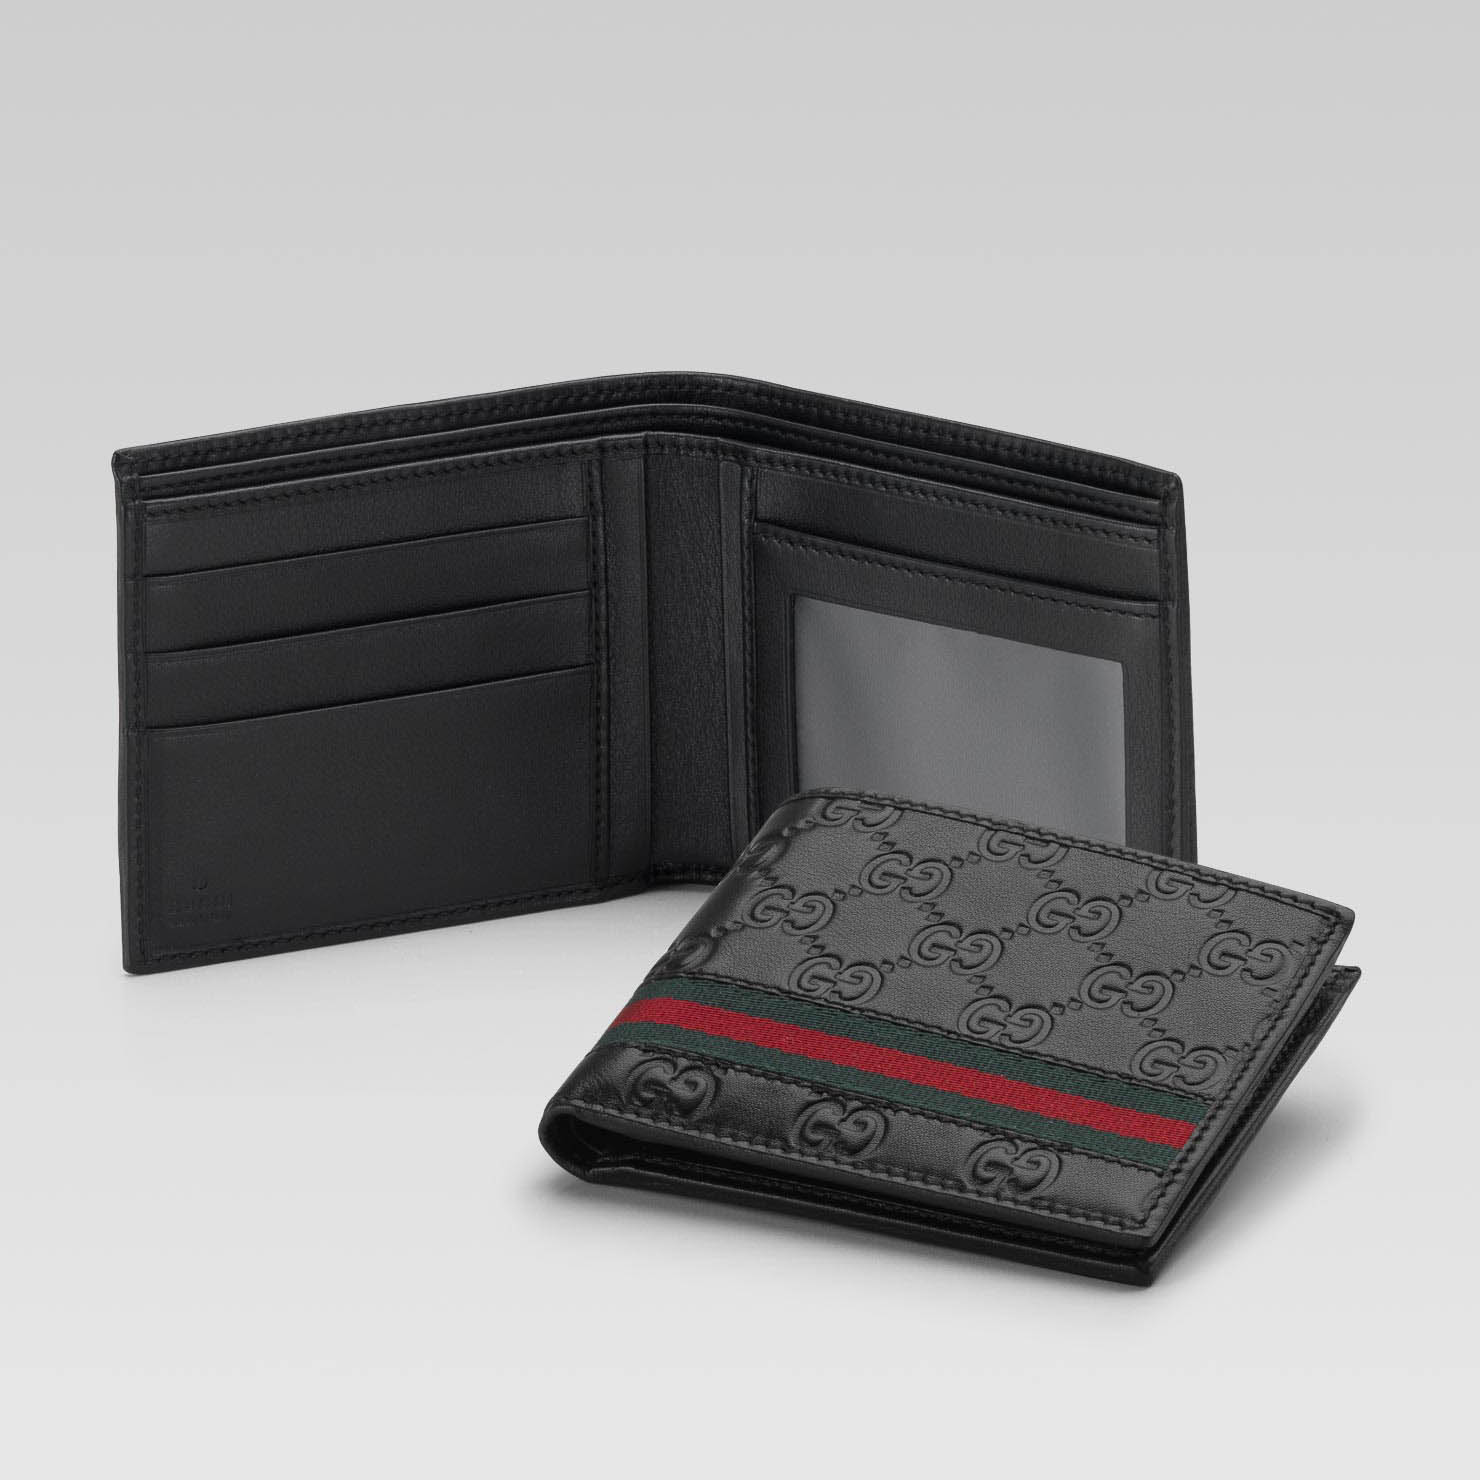 Fashion :: Bags & Wallets :: Wallets :: Gucci Wallet Chocolate Red Green - 0